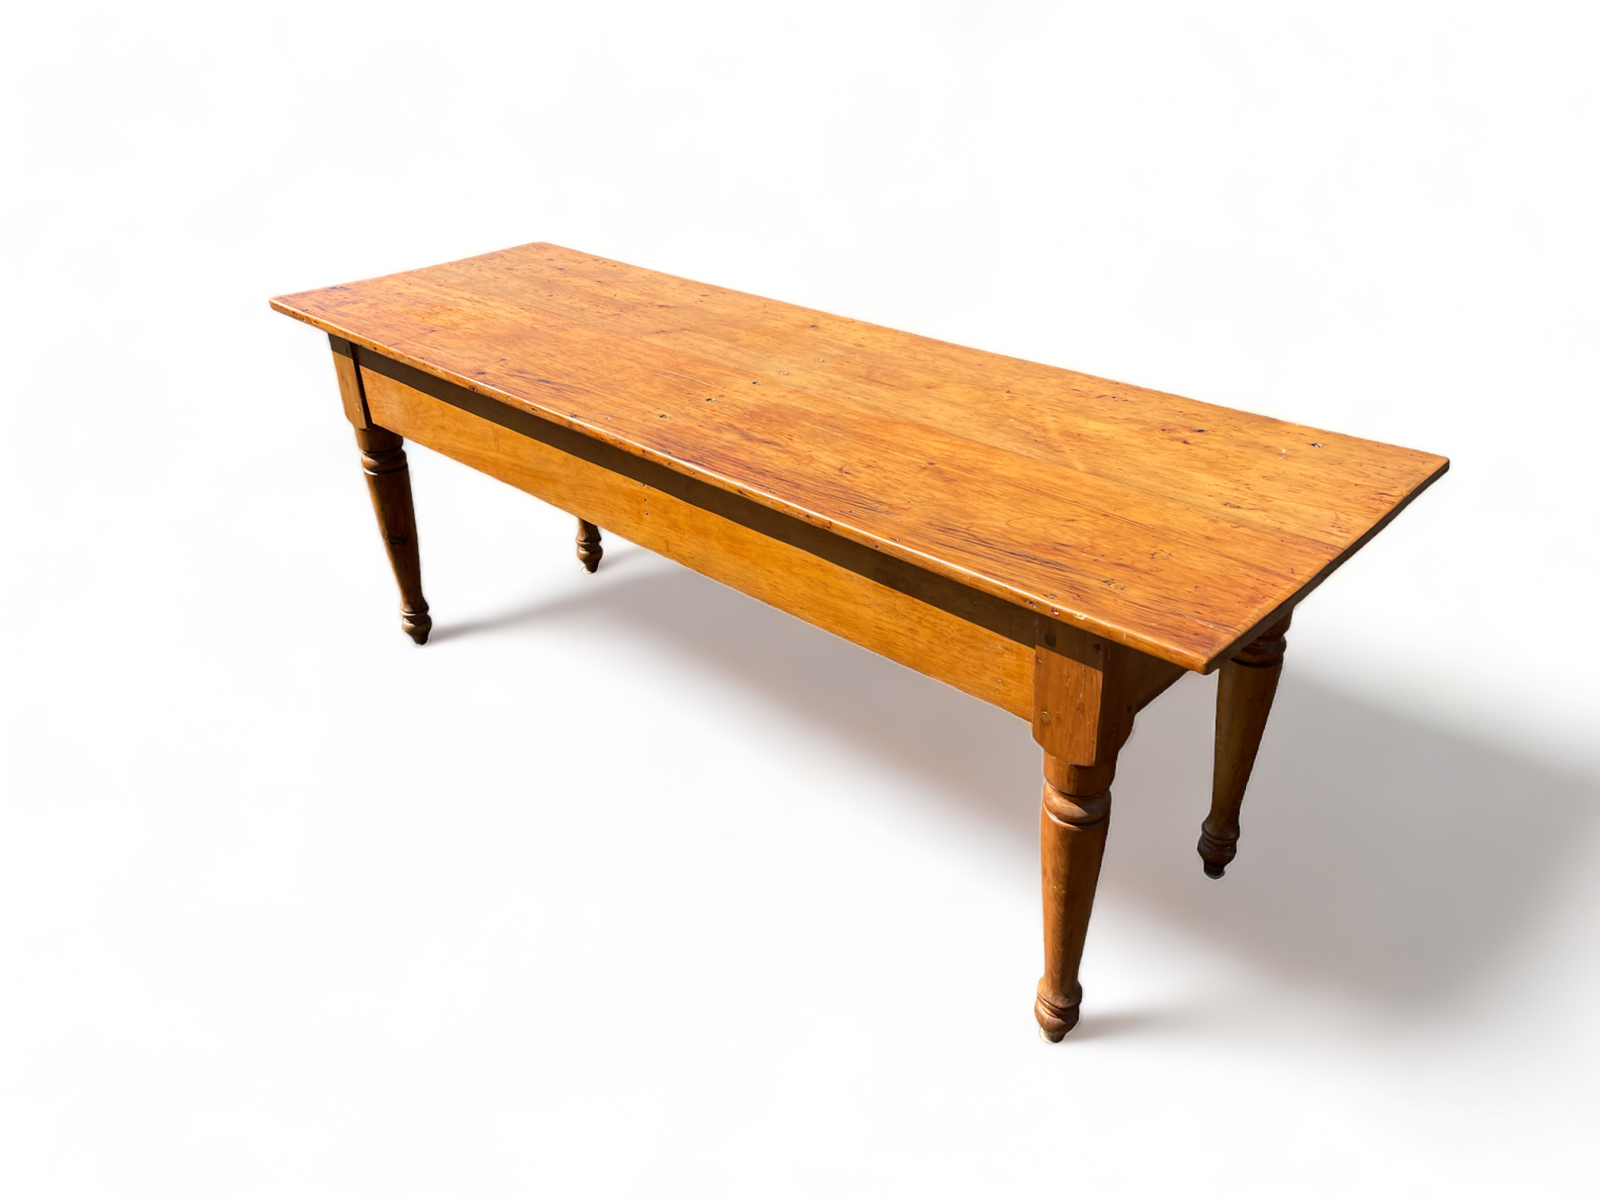 LARGE HARVEST TABLE: A rustic,